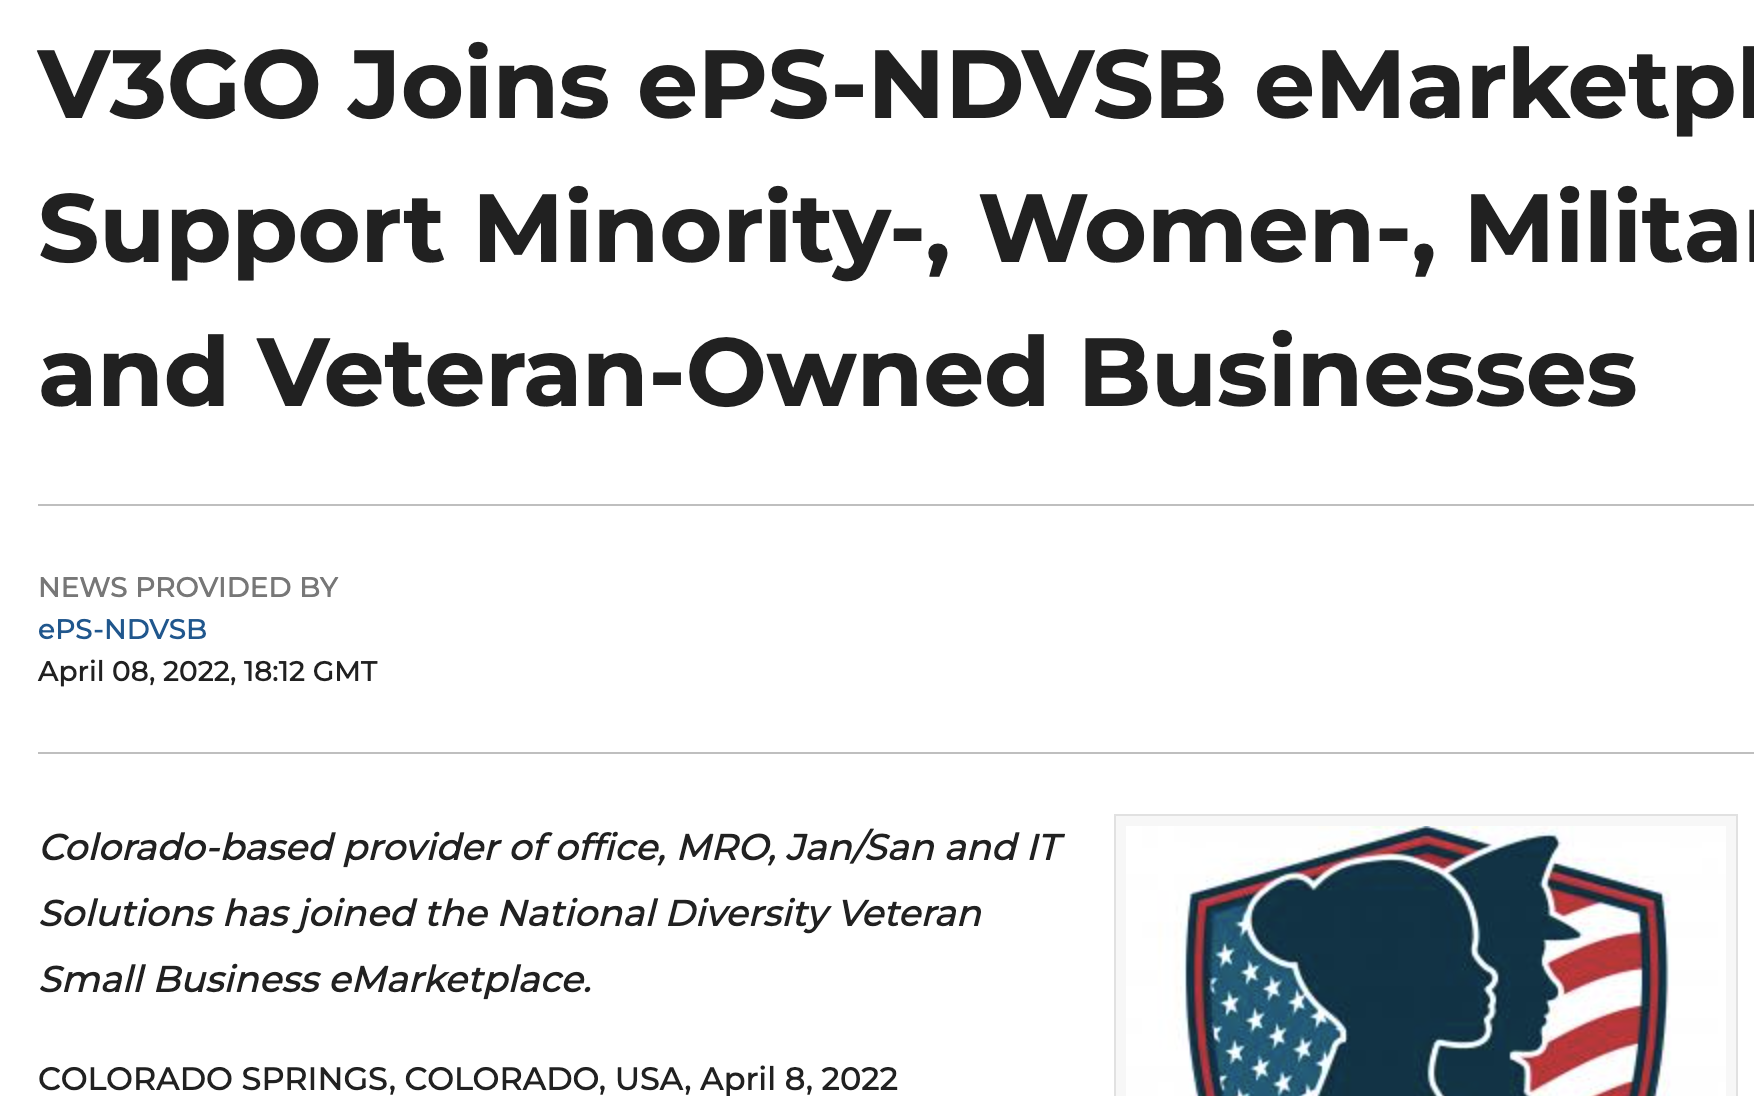 V3GO, Colorado-based provider of office, MRO, Jan/San and IT Solutions has joined the National Diversity Veteran Small Business eMarketplace.